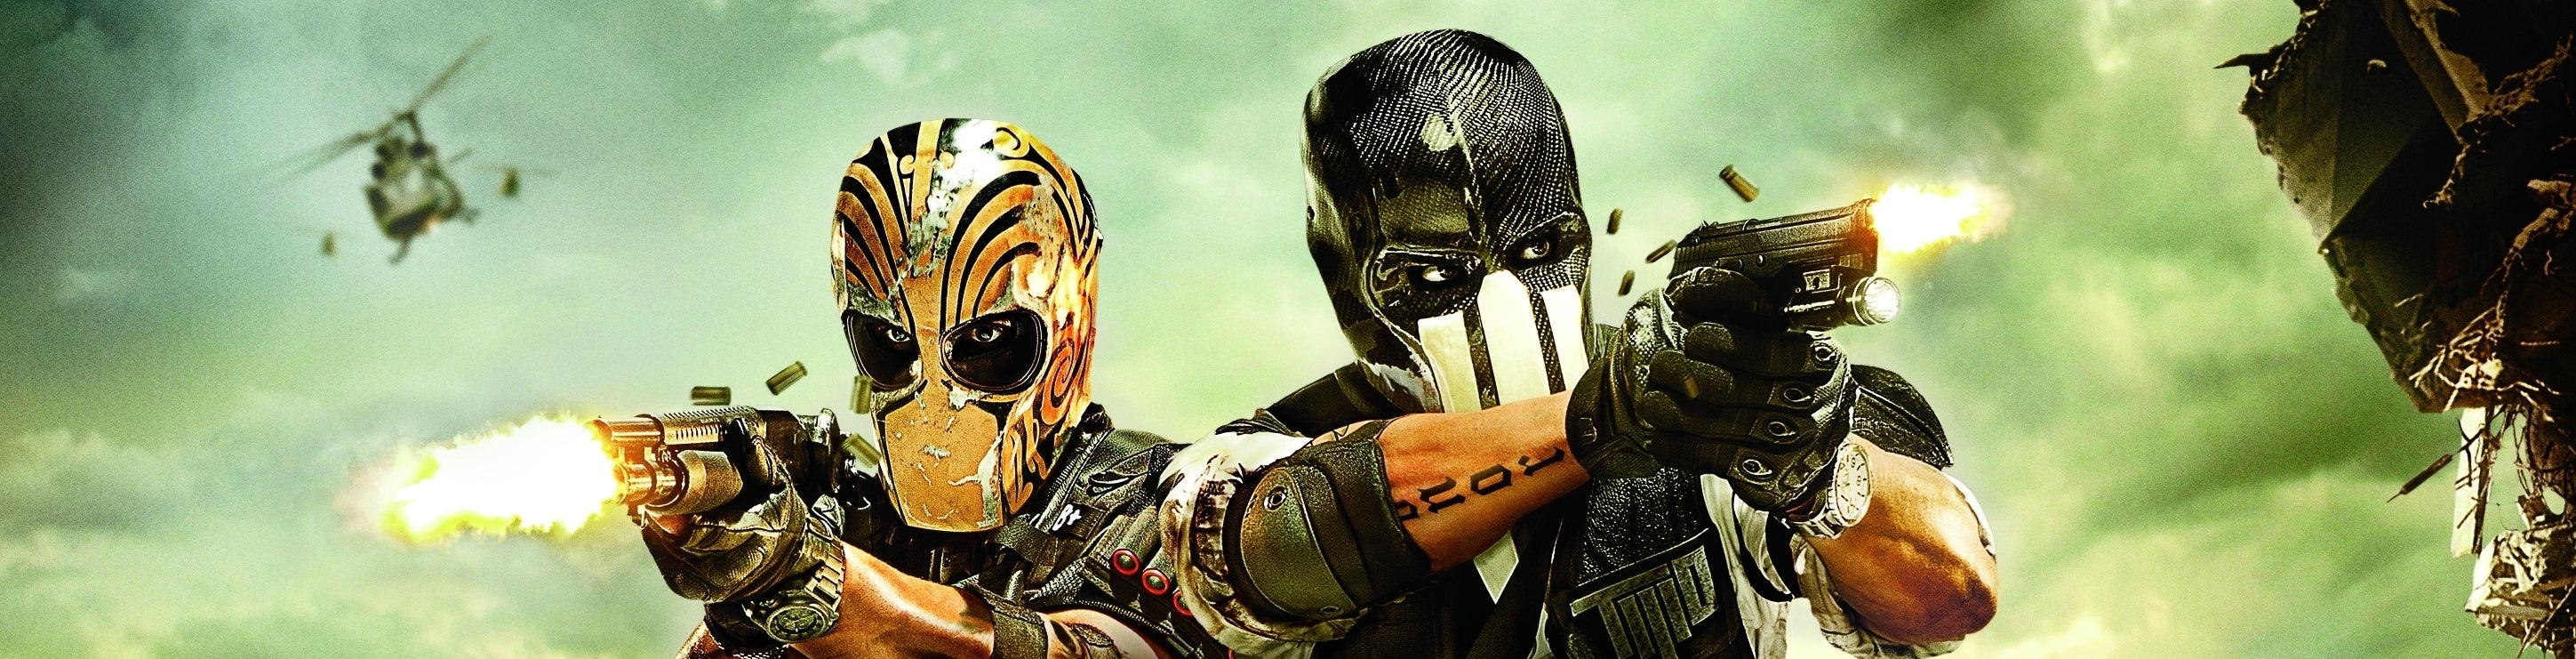 Image for Army of Two: The Devil's Cartel review